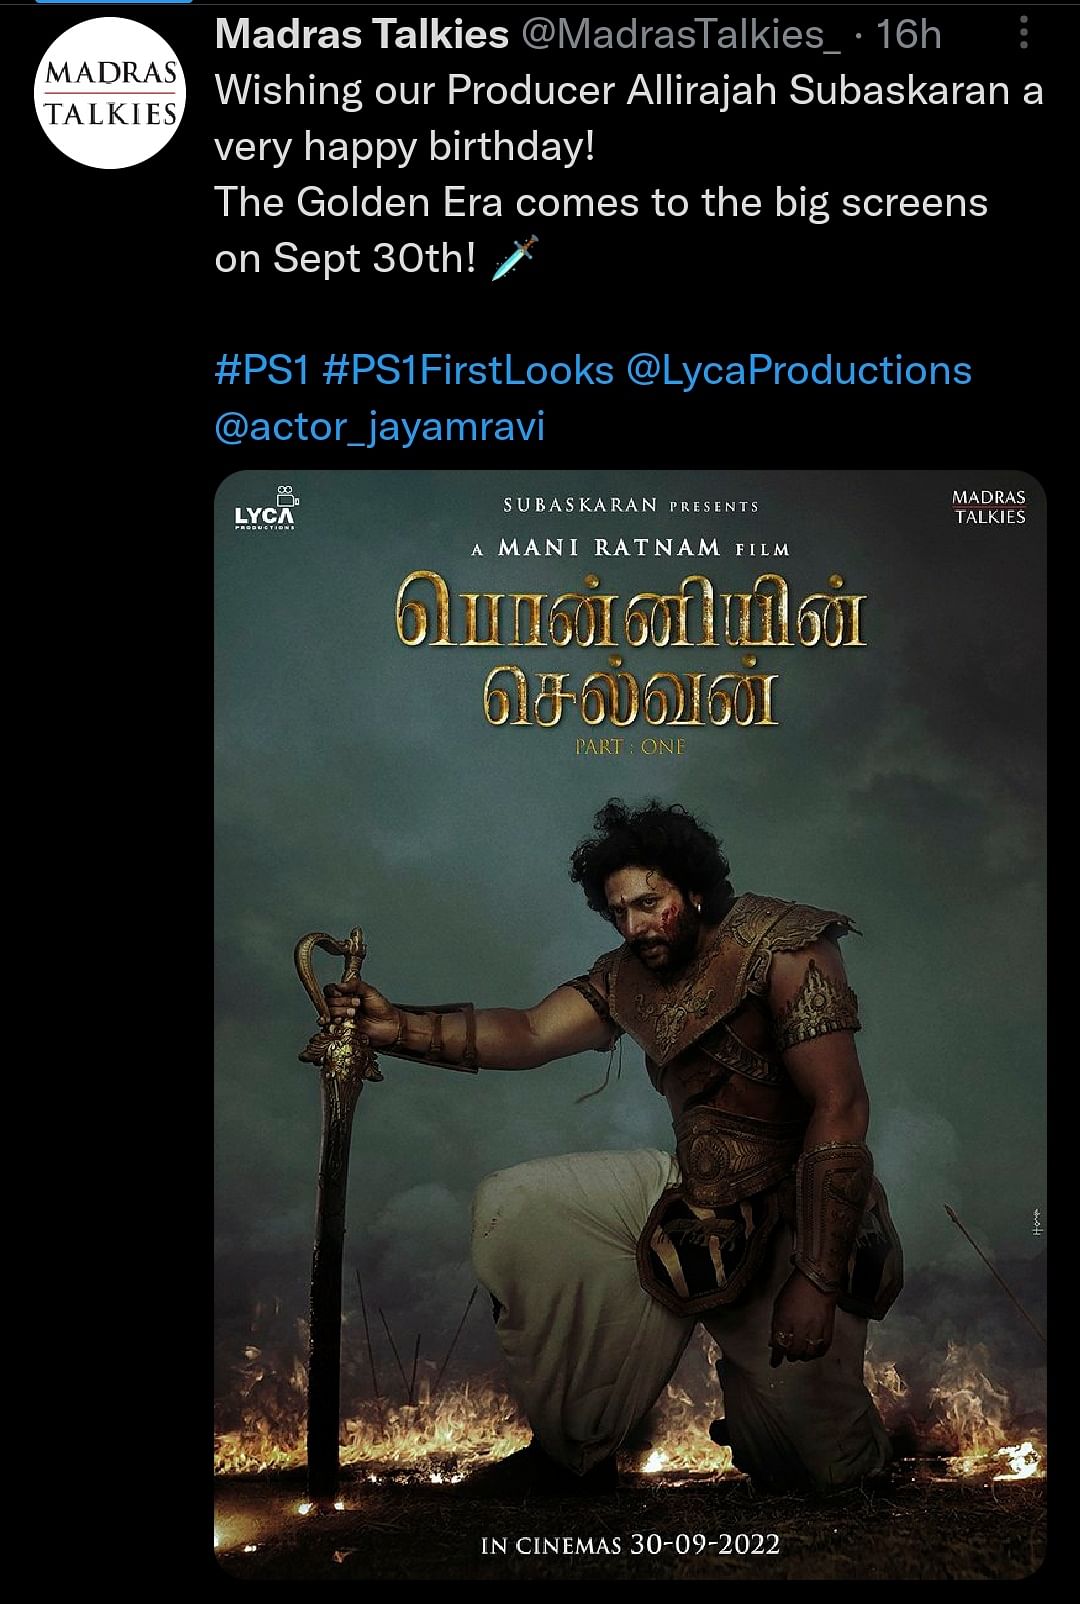 'Ponniyin Selvan', directed by Mani Ratnam, wil be released in two parts.